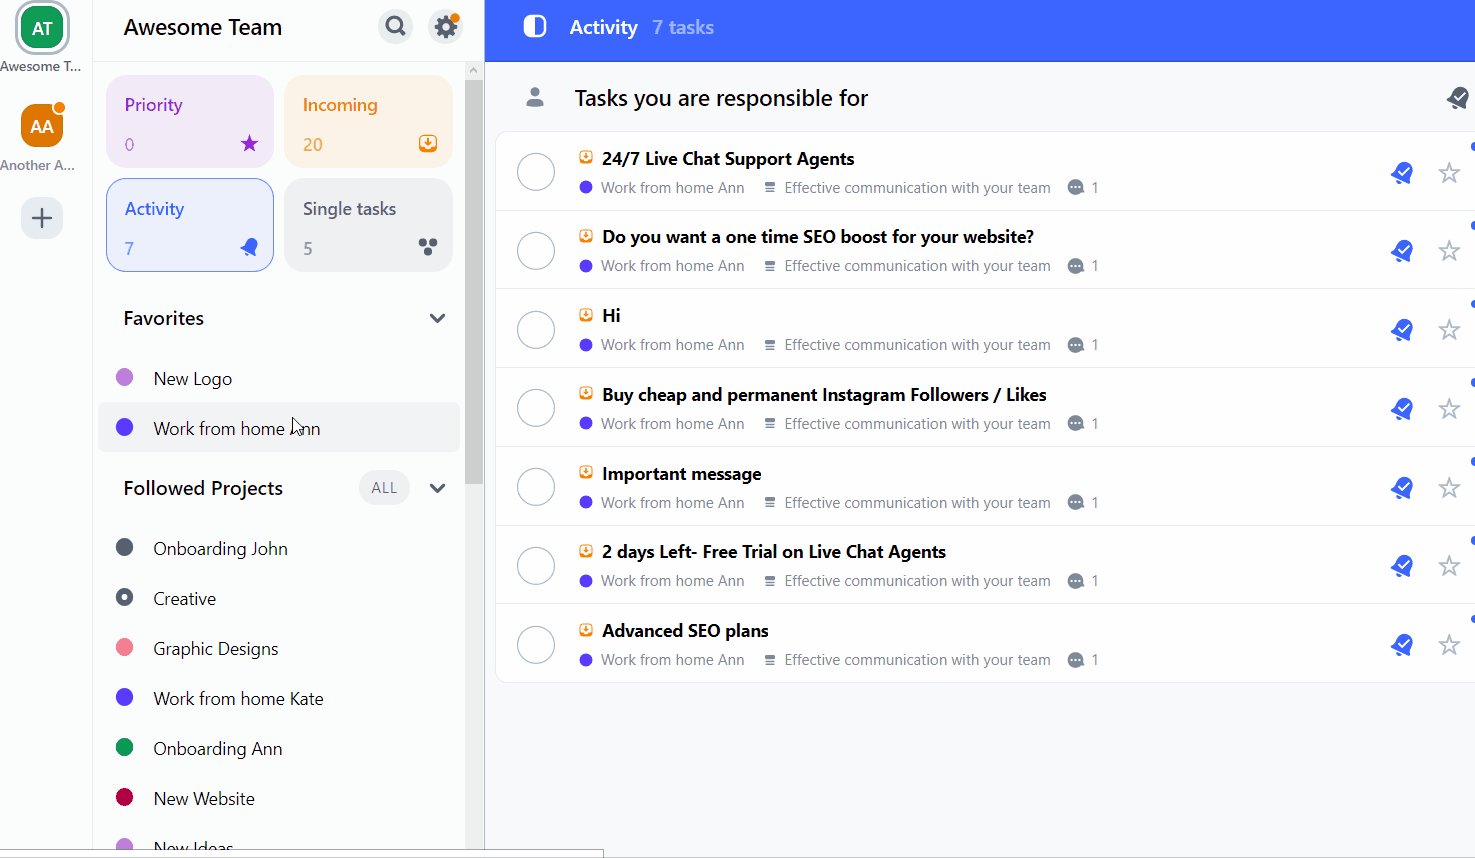 How to Filter Task List